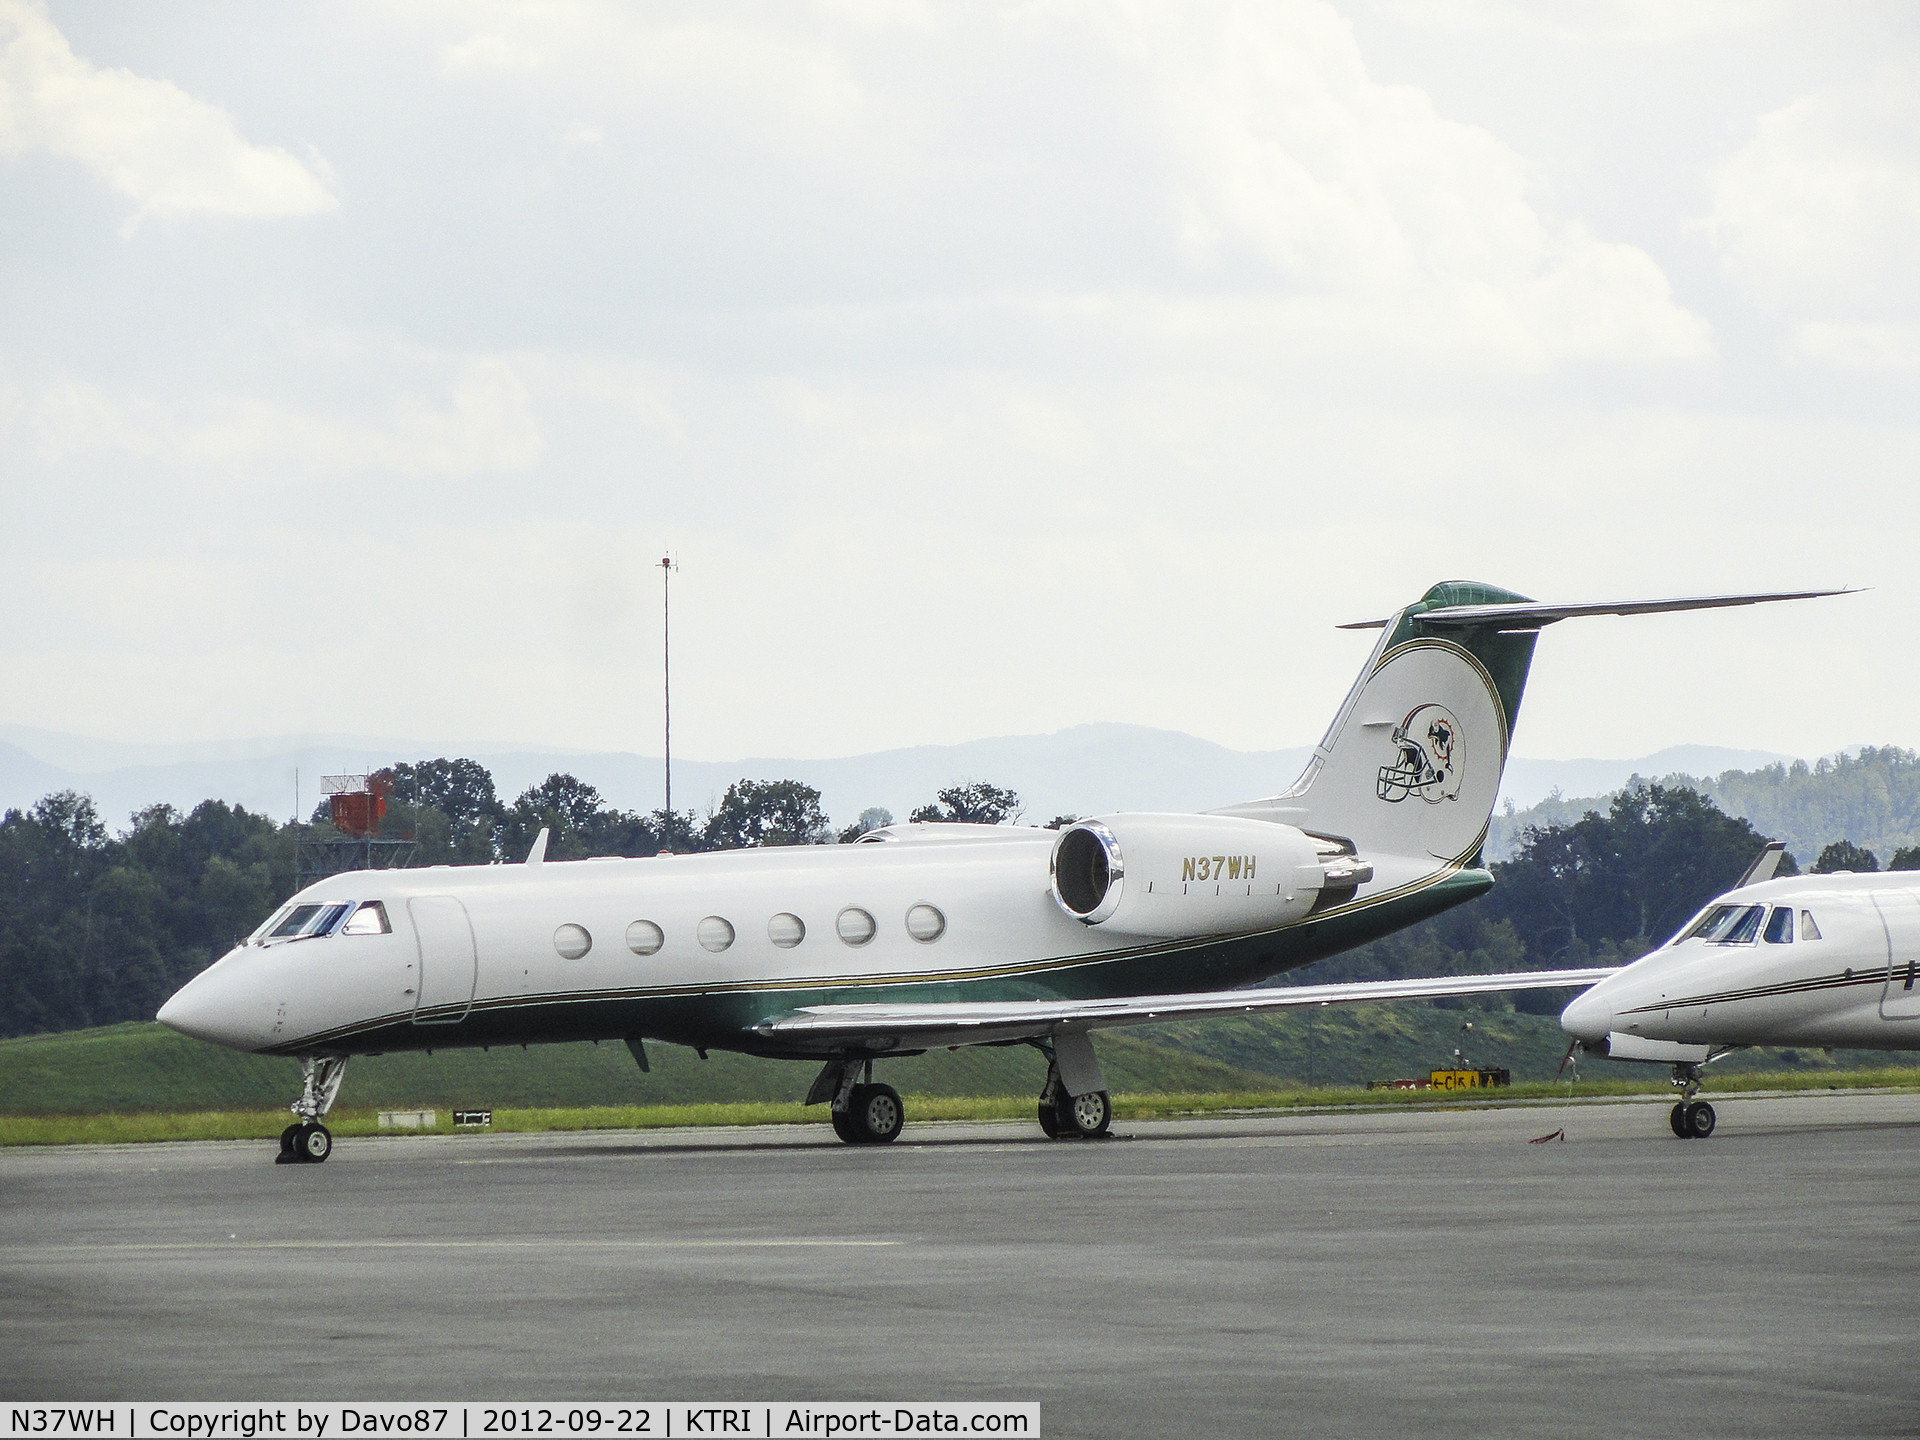 N37WH, 1994 Gulfstream Aerospace G-IV C/N 1243, Photographed at KTRI (Tri Cities Airport) on September 22, 2012.